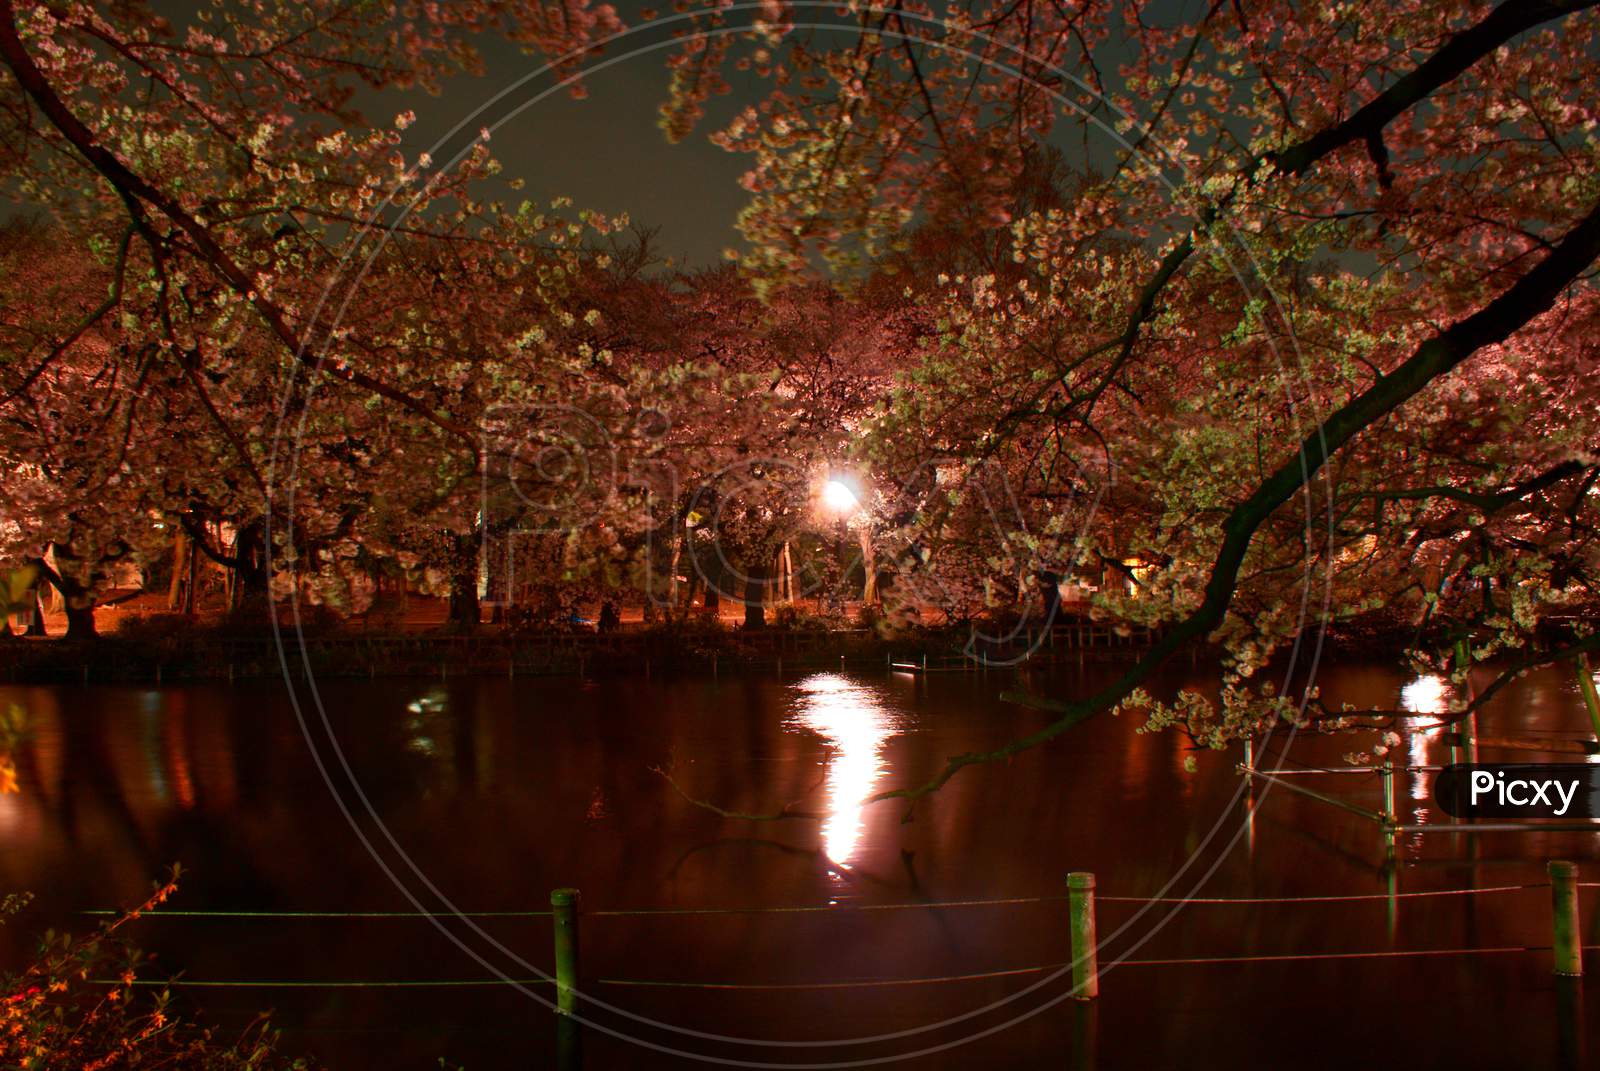 Image Of Going To See Cherry Blossoms At Night